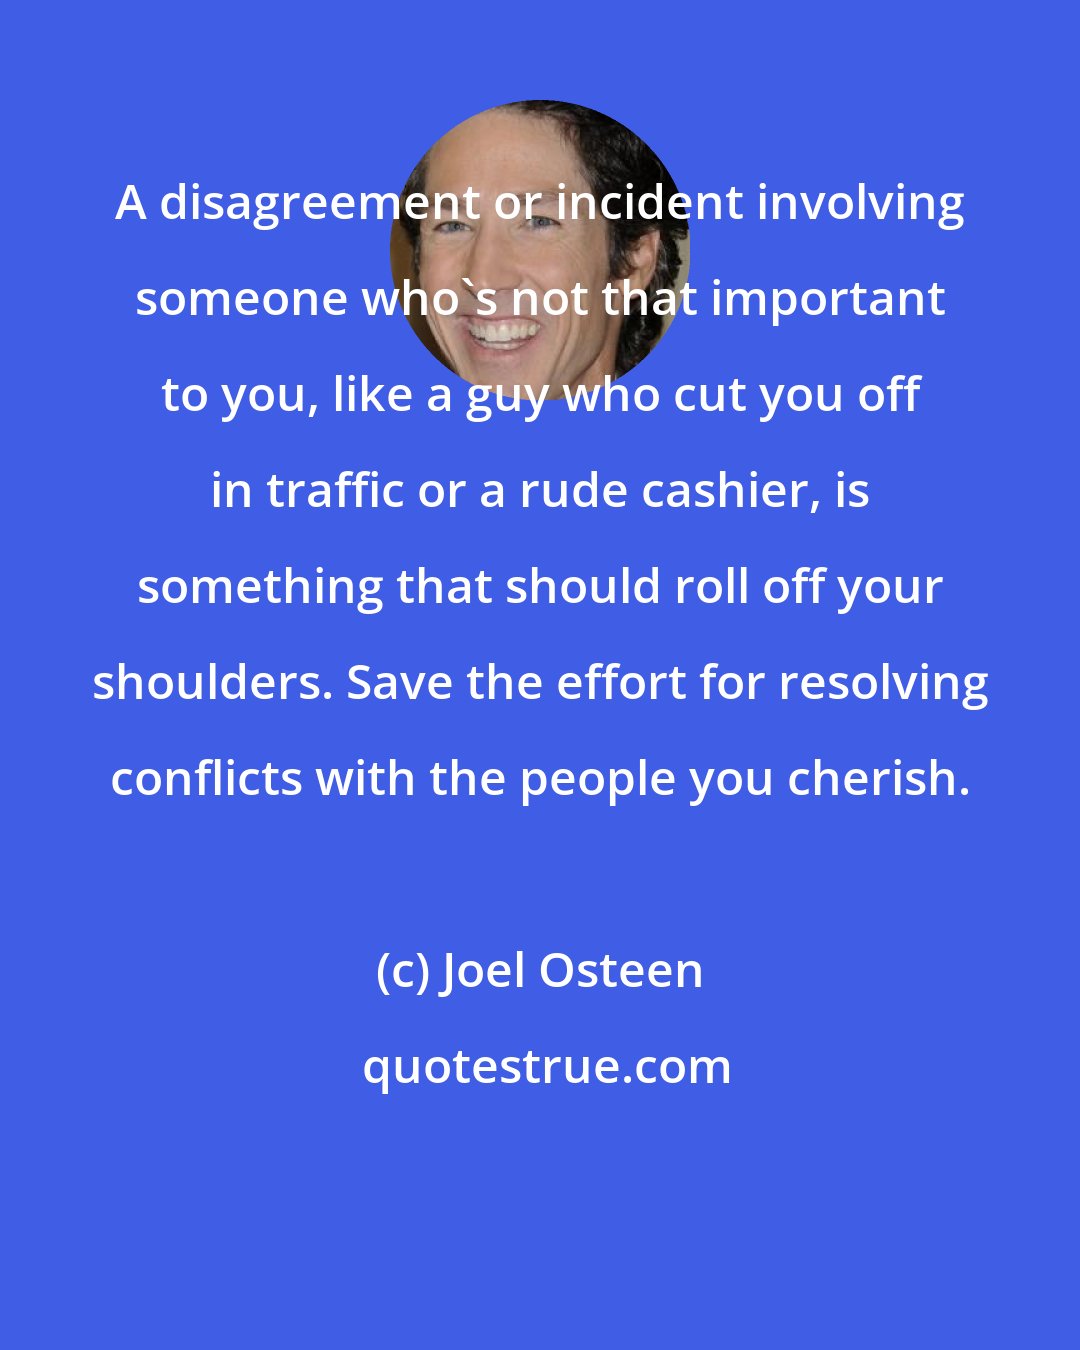 Joel Osteen: A disagreement or incident involving someone who's not that important to you, like a guy who cut you off in traffic or a rude cashier, is something that should roll off your shoulders. Save the effort for resolving conflicts with the people you cherish.